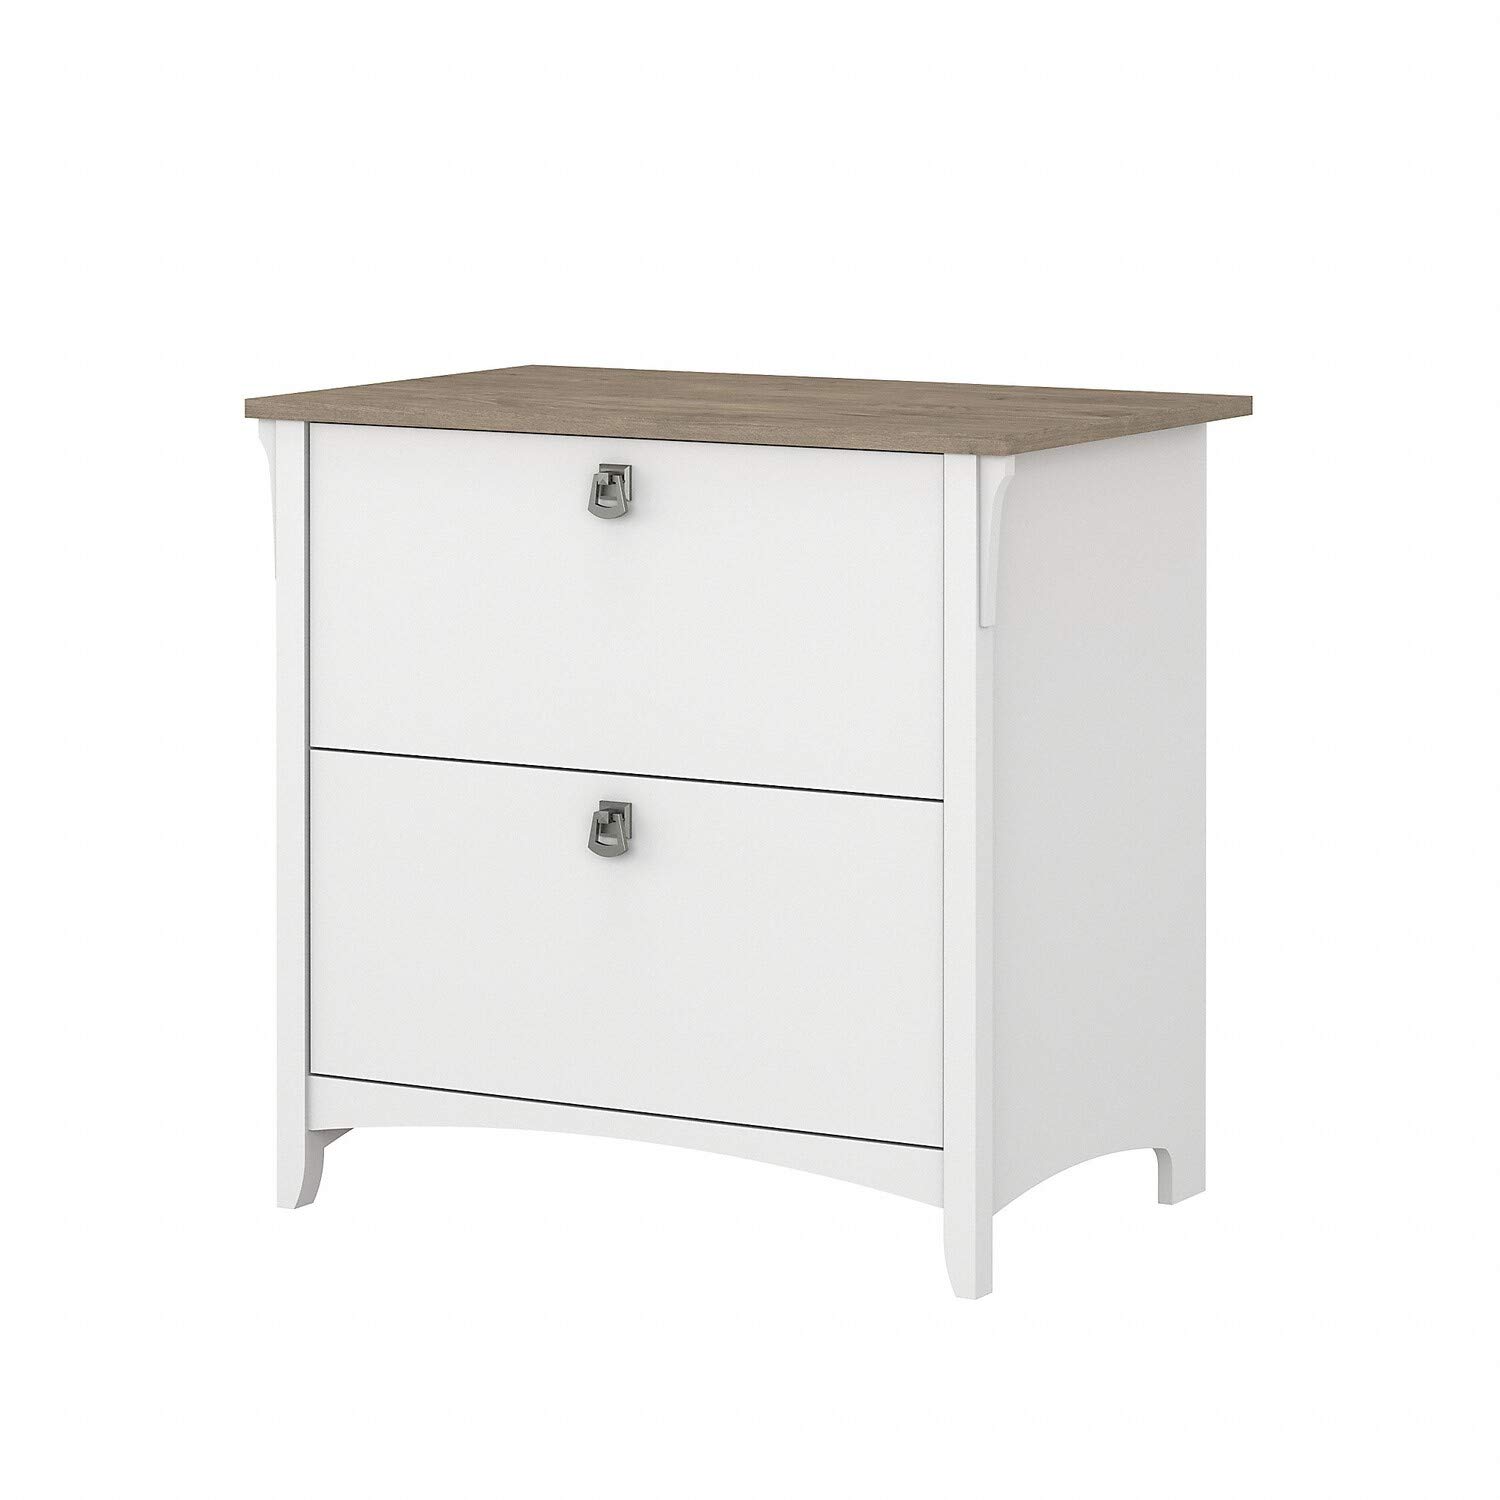 Bush Furniture Salinas 2 Drawer Lateral File Cabinet, Pure White and Shiplap Gray